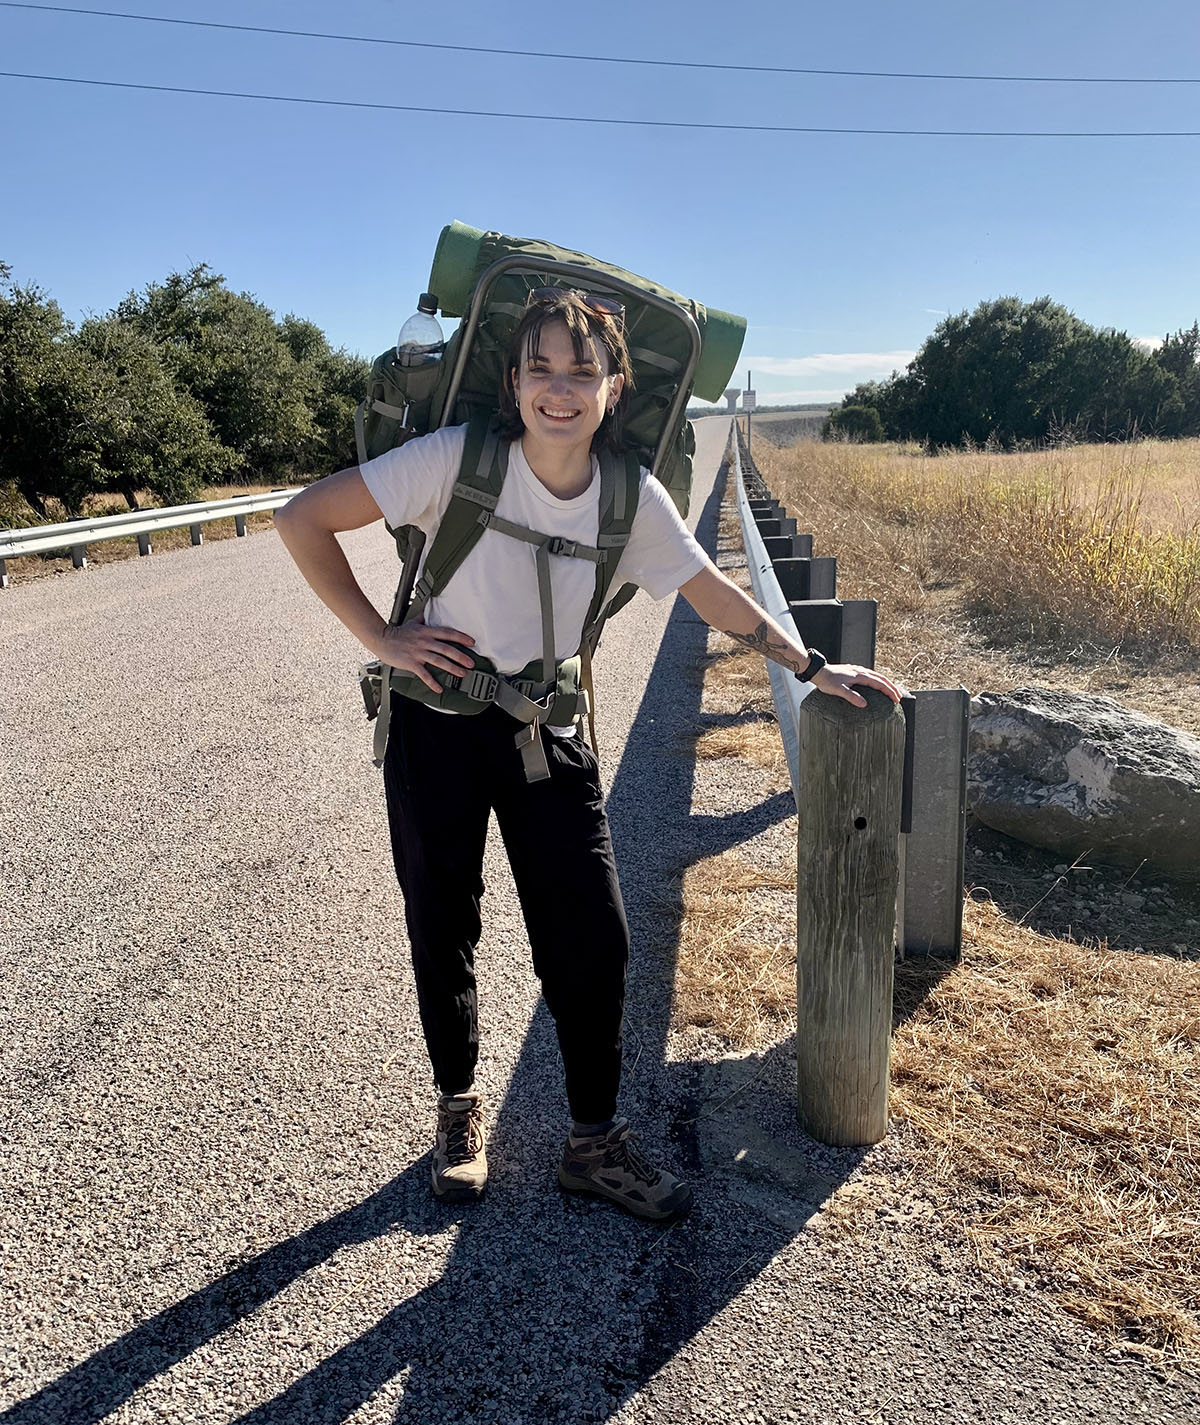 A woman in a t-shirt and green backpacking pack stands at the side of a road under blue sky